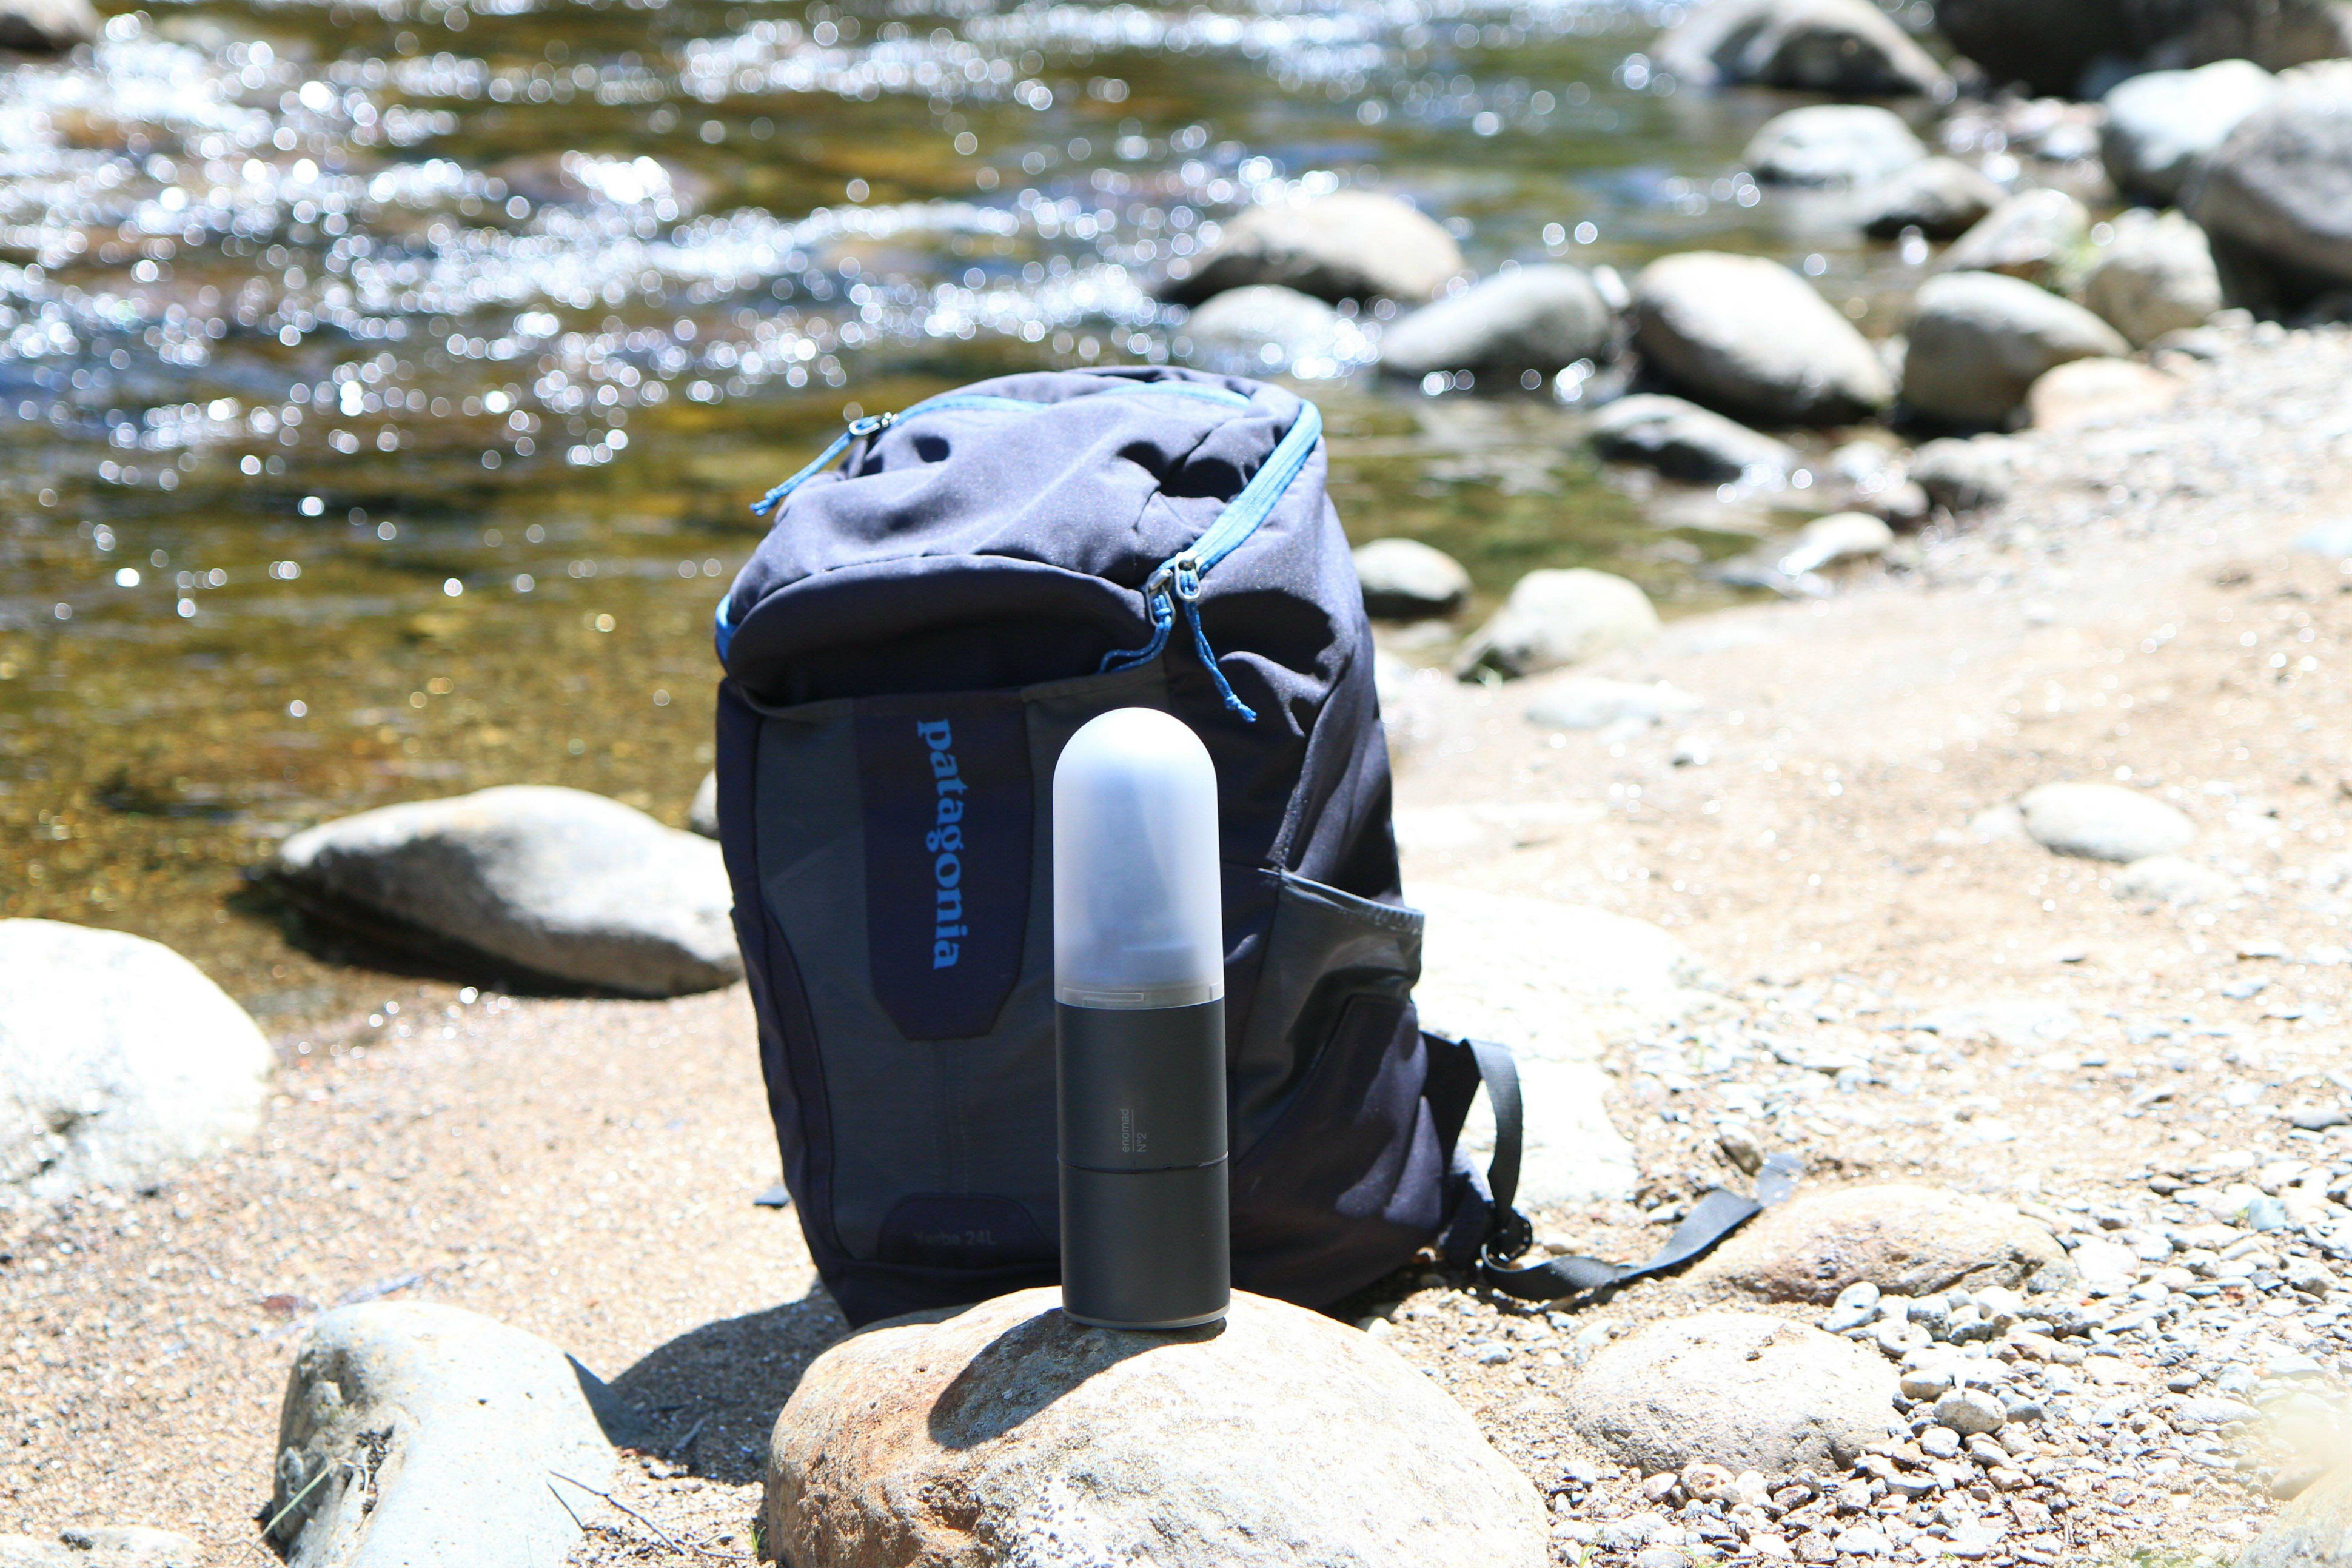 estream hydropower portable charger 23320enomad20pics1